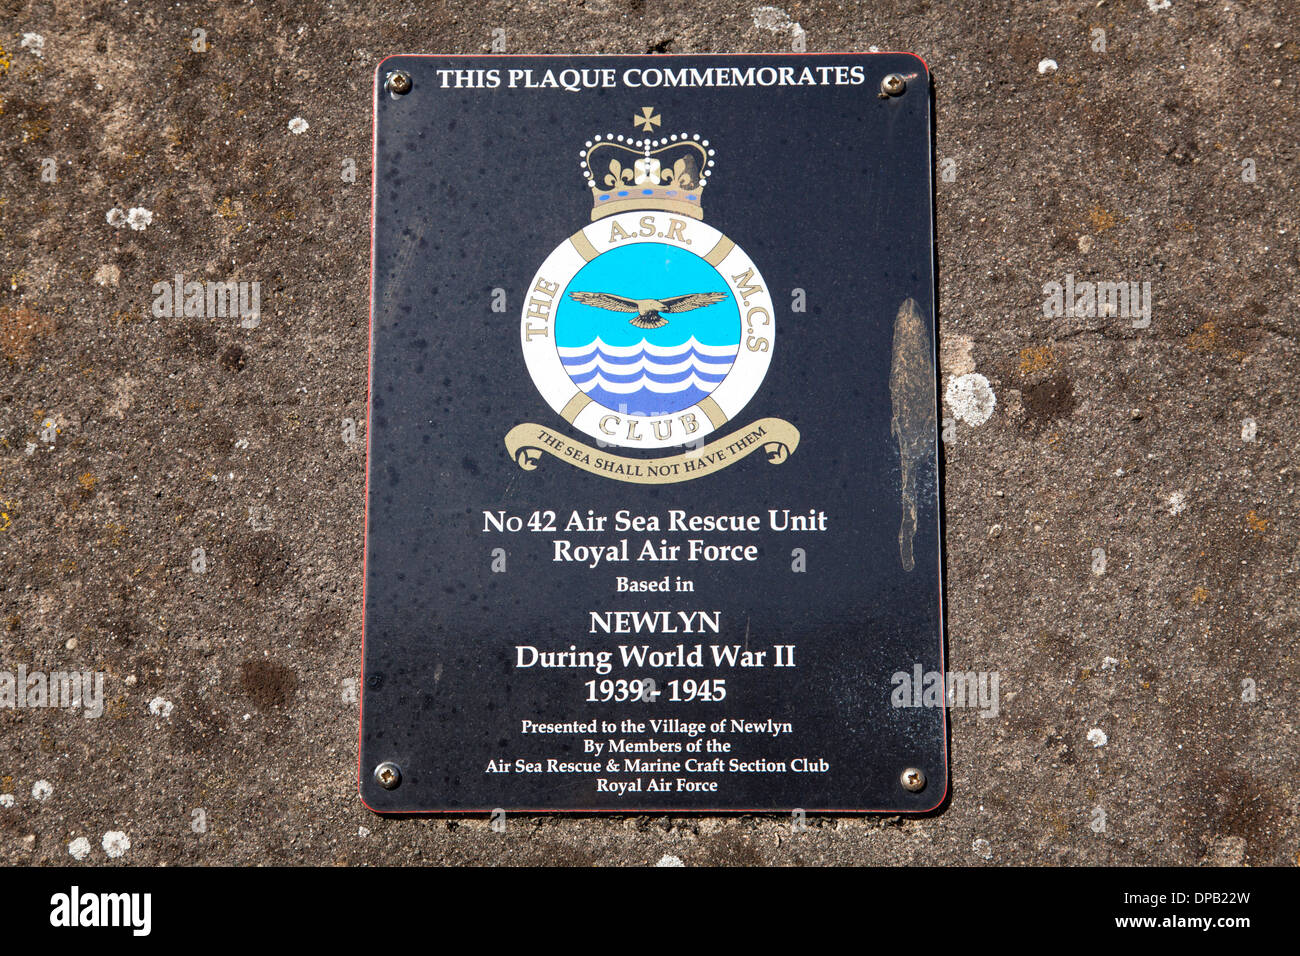 A plaque commemorating the Royal Air Force No42 Air Sea Rescue Unit based in Newlyn, Cornwall, U.K. during World War II. Stock Photo